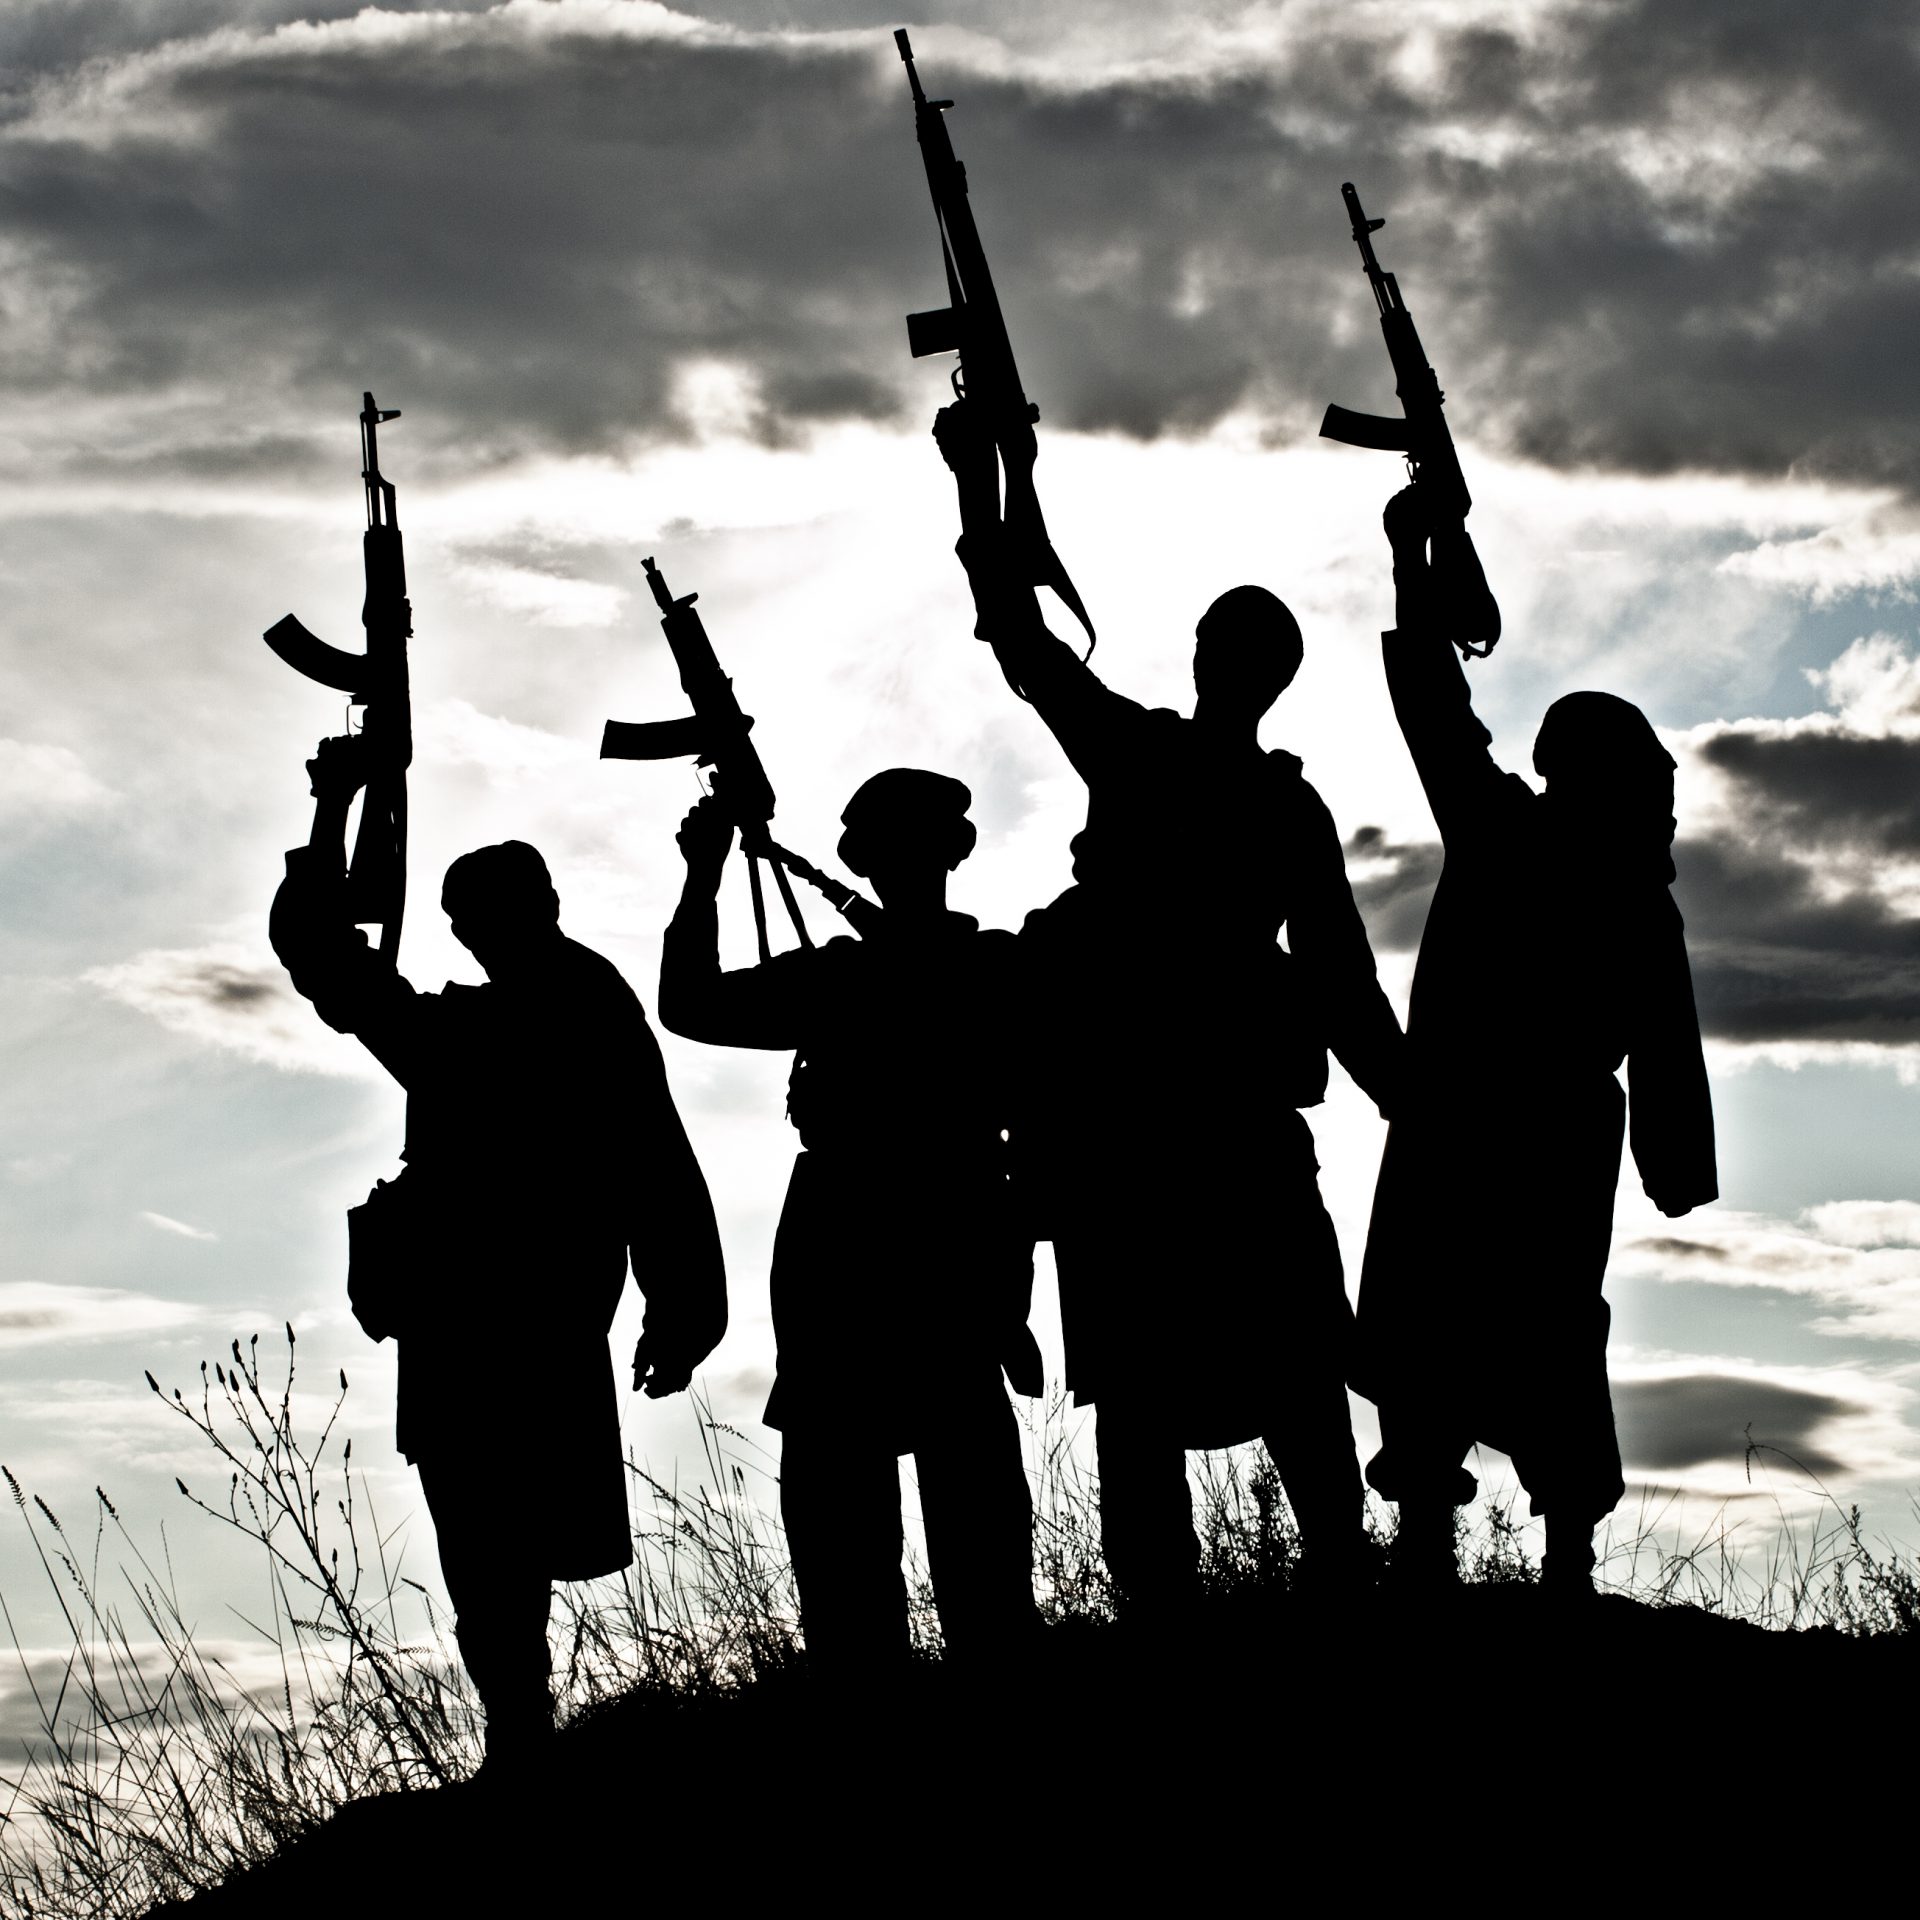 Silhouette of several militants with rifles